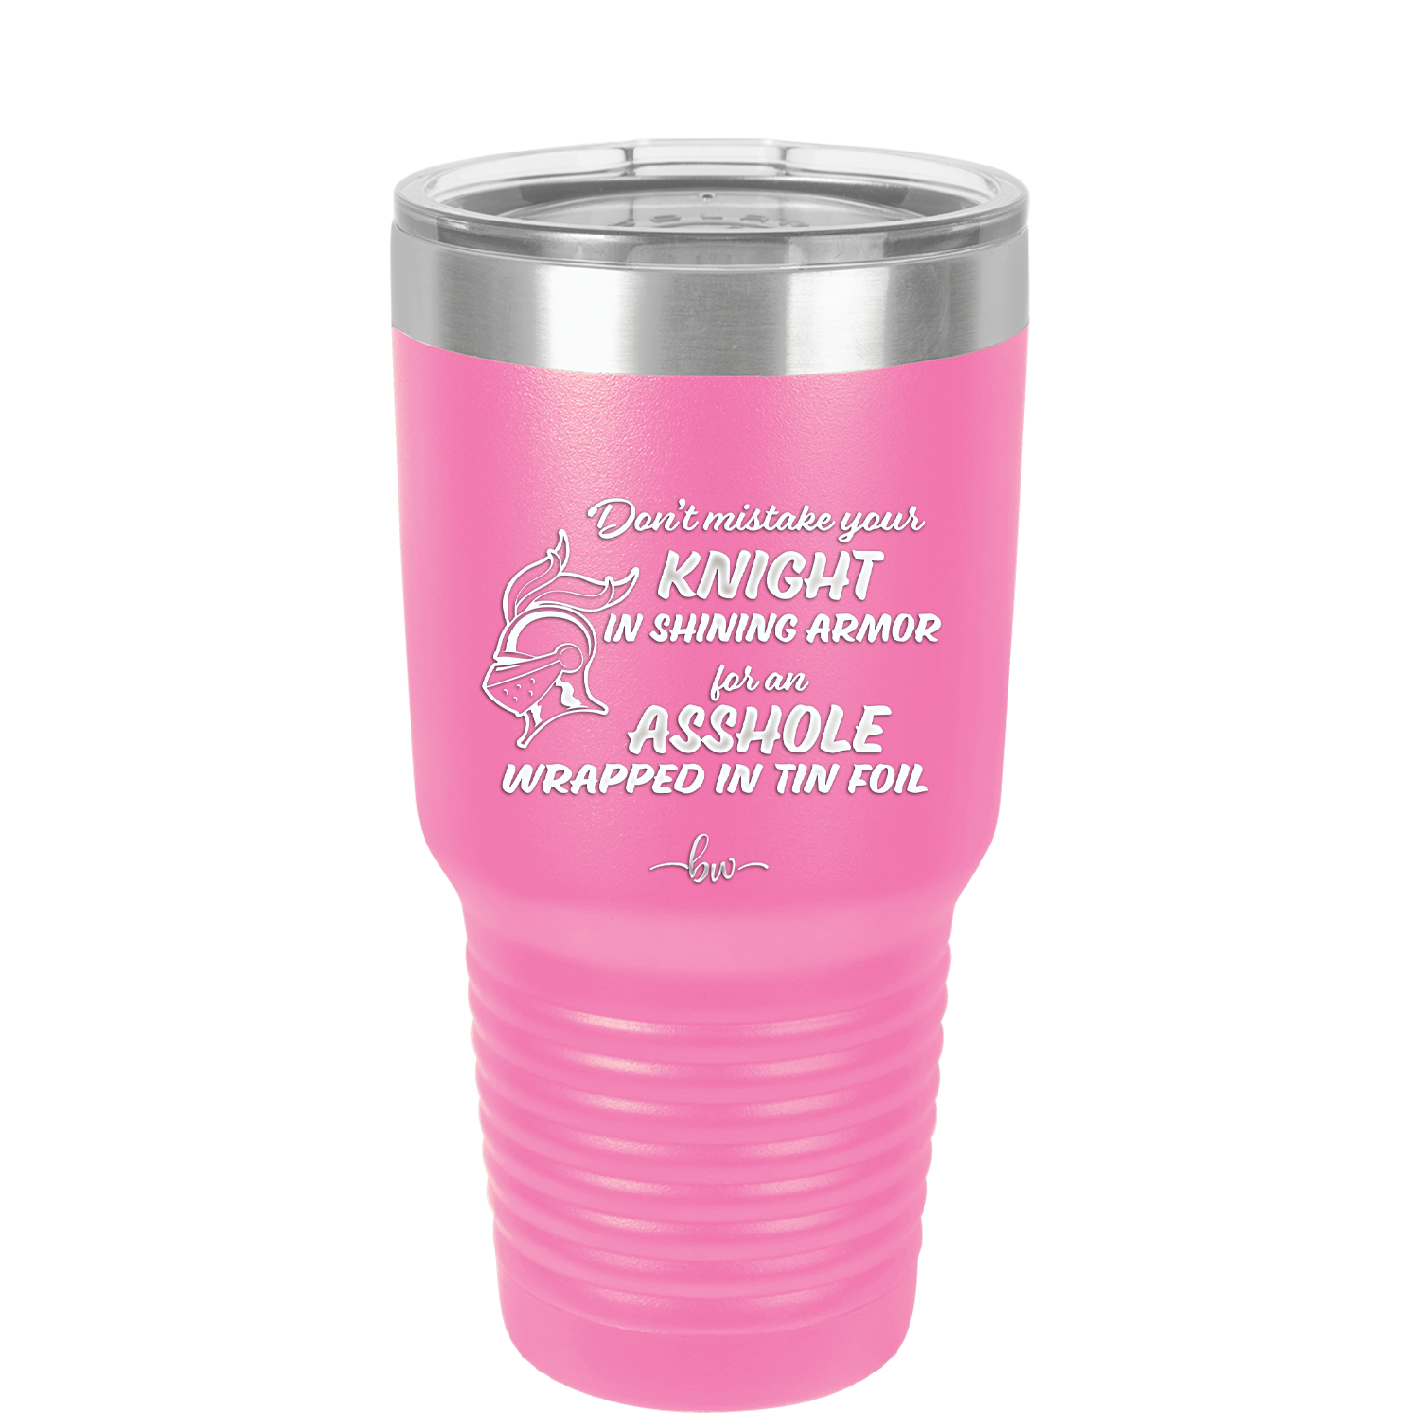 Don't Mistake Your Knight in Shining Armor for an Asshole Wearing Tin Foil - Laser Engraved Stainless Steel Drinkware - 2405 -